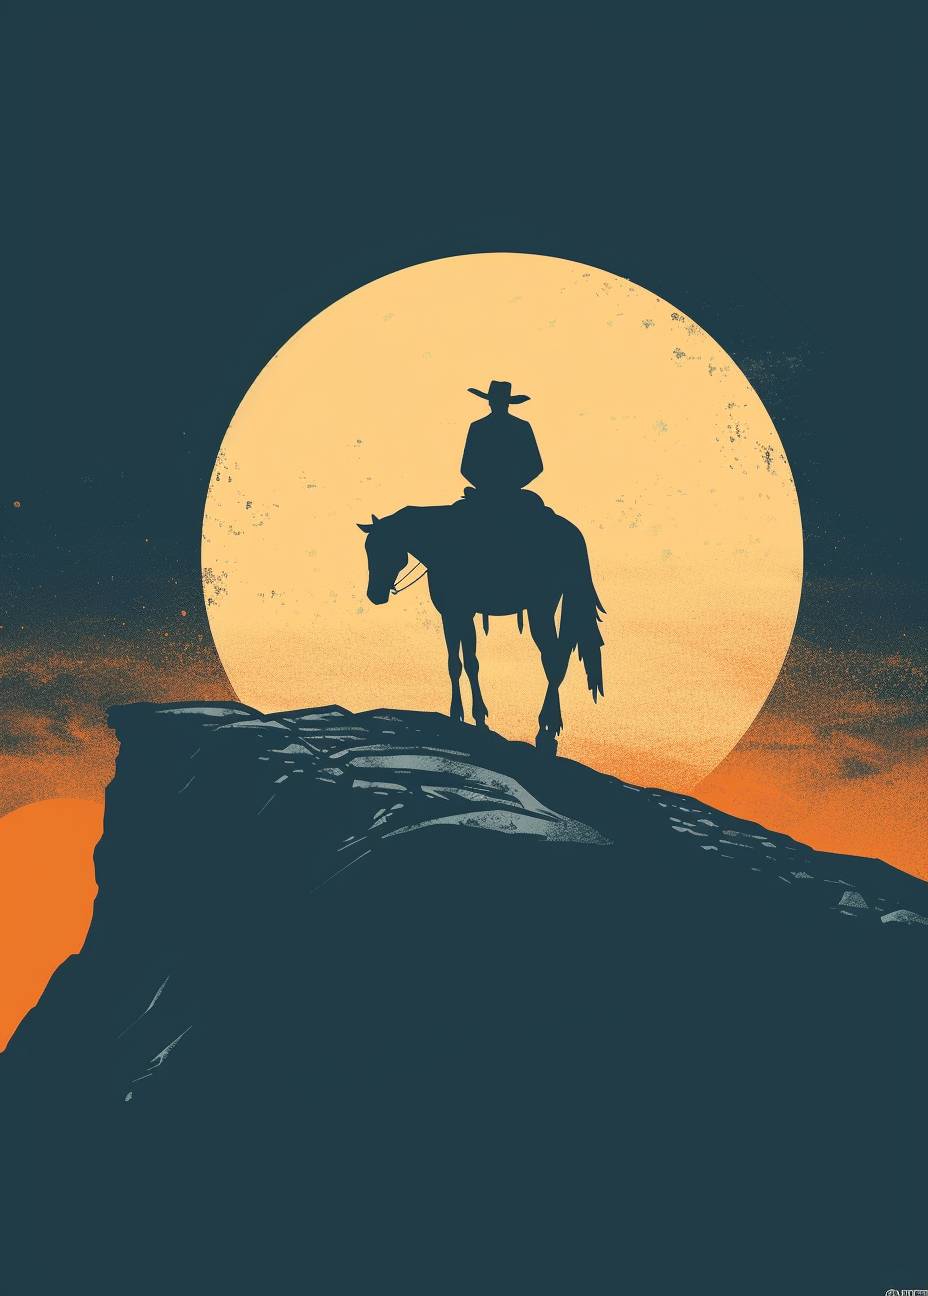 A cowboy riding his horse towards the moonlight, concept art by Moebius, illustration, creative, very minimalist, simple, vector, comic book style